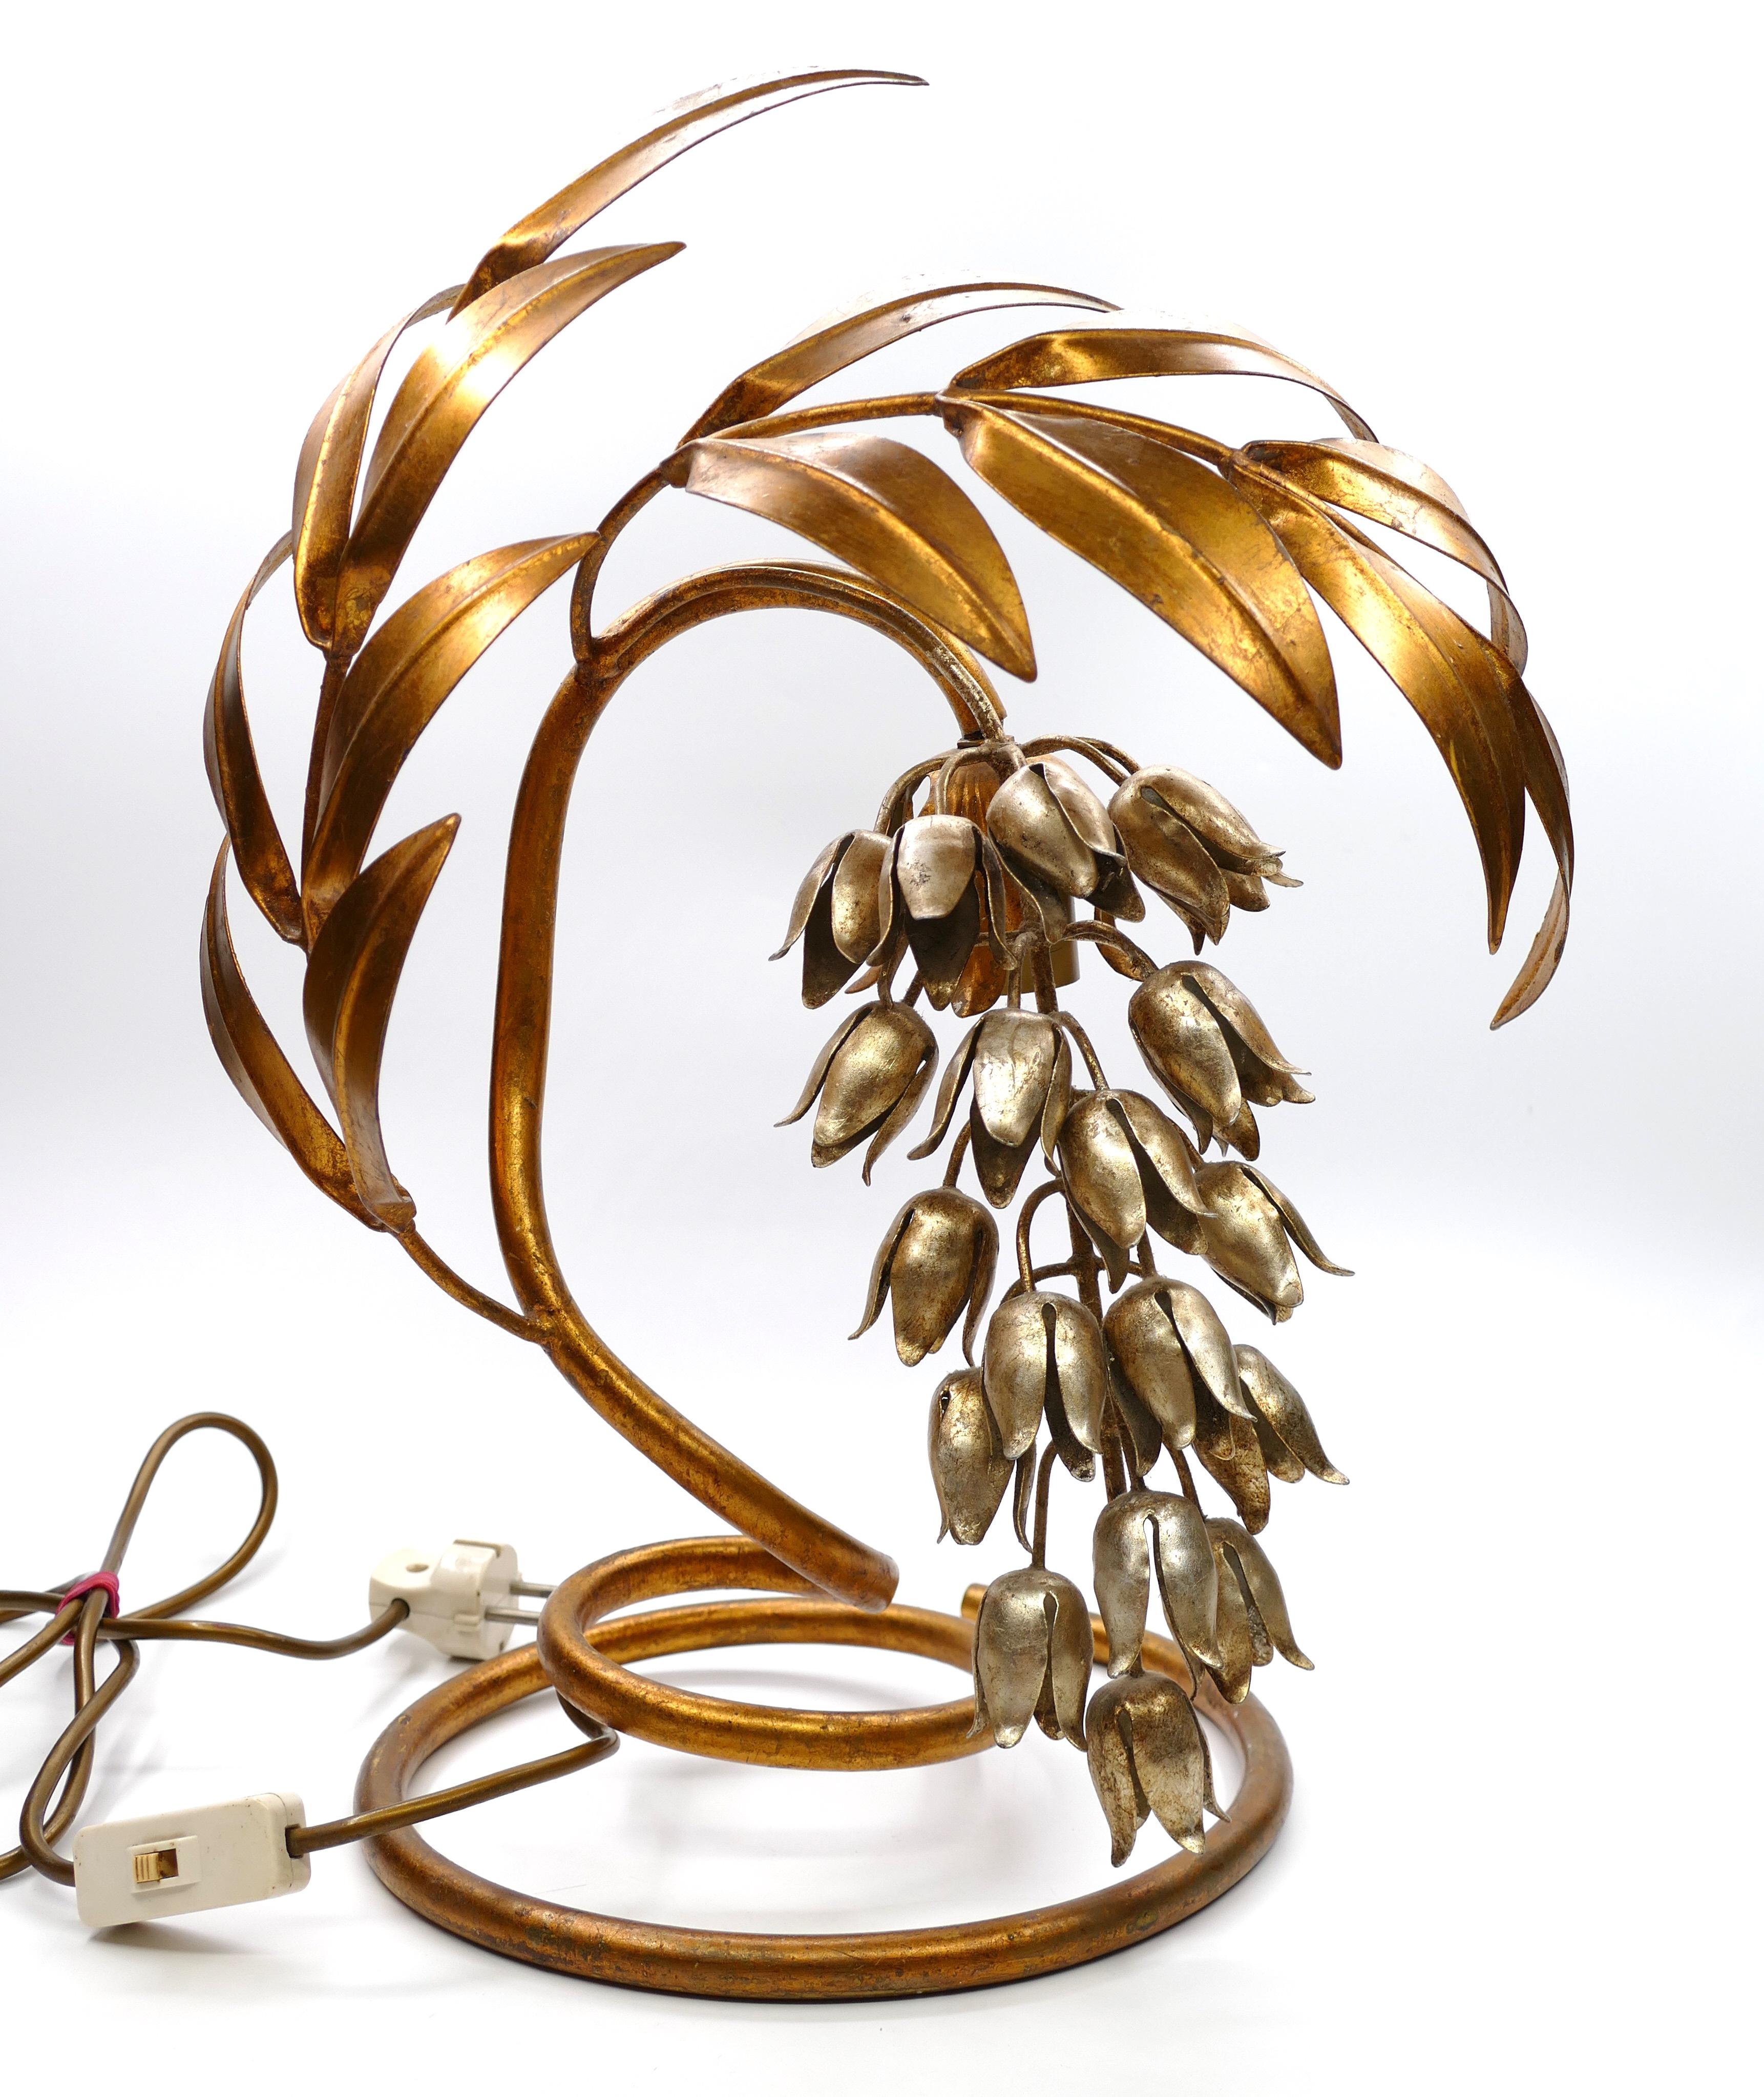 Wisteria table lamp is an original design lamp realized by the German designer Hans Kögl, circa 1970s.

Iconic table lamp made of silver and gold-plated metal.

Hans Kögl became famous as a lightning designer creating huge gilt metal lamps with a